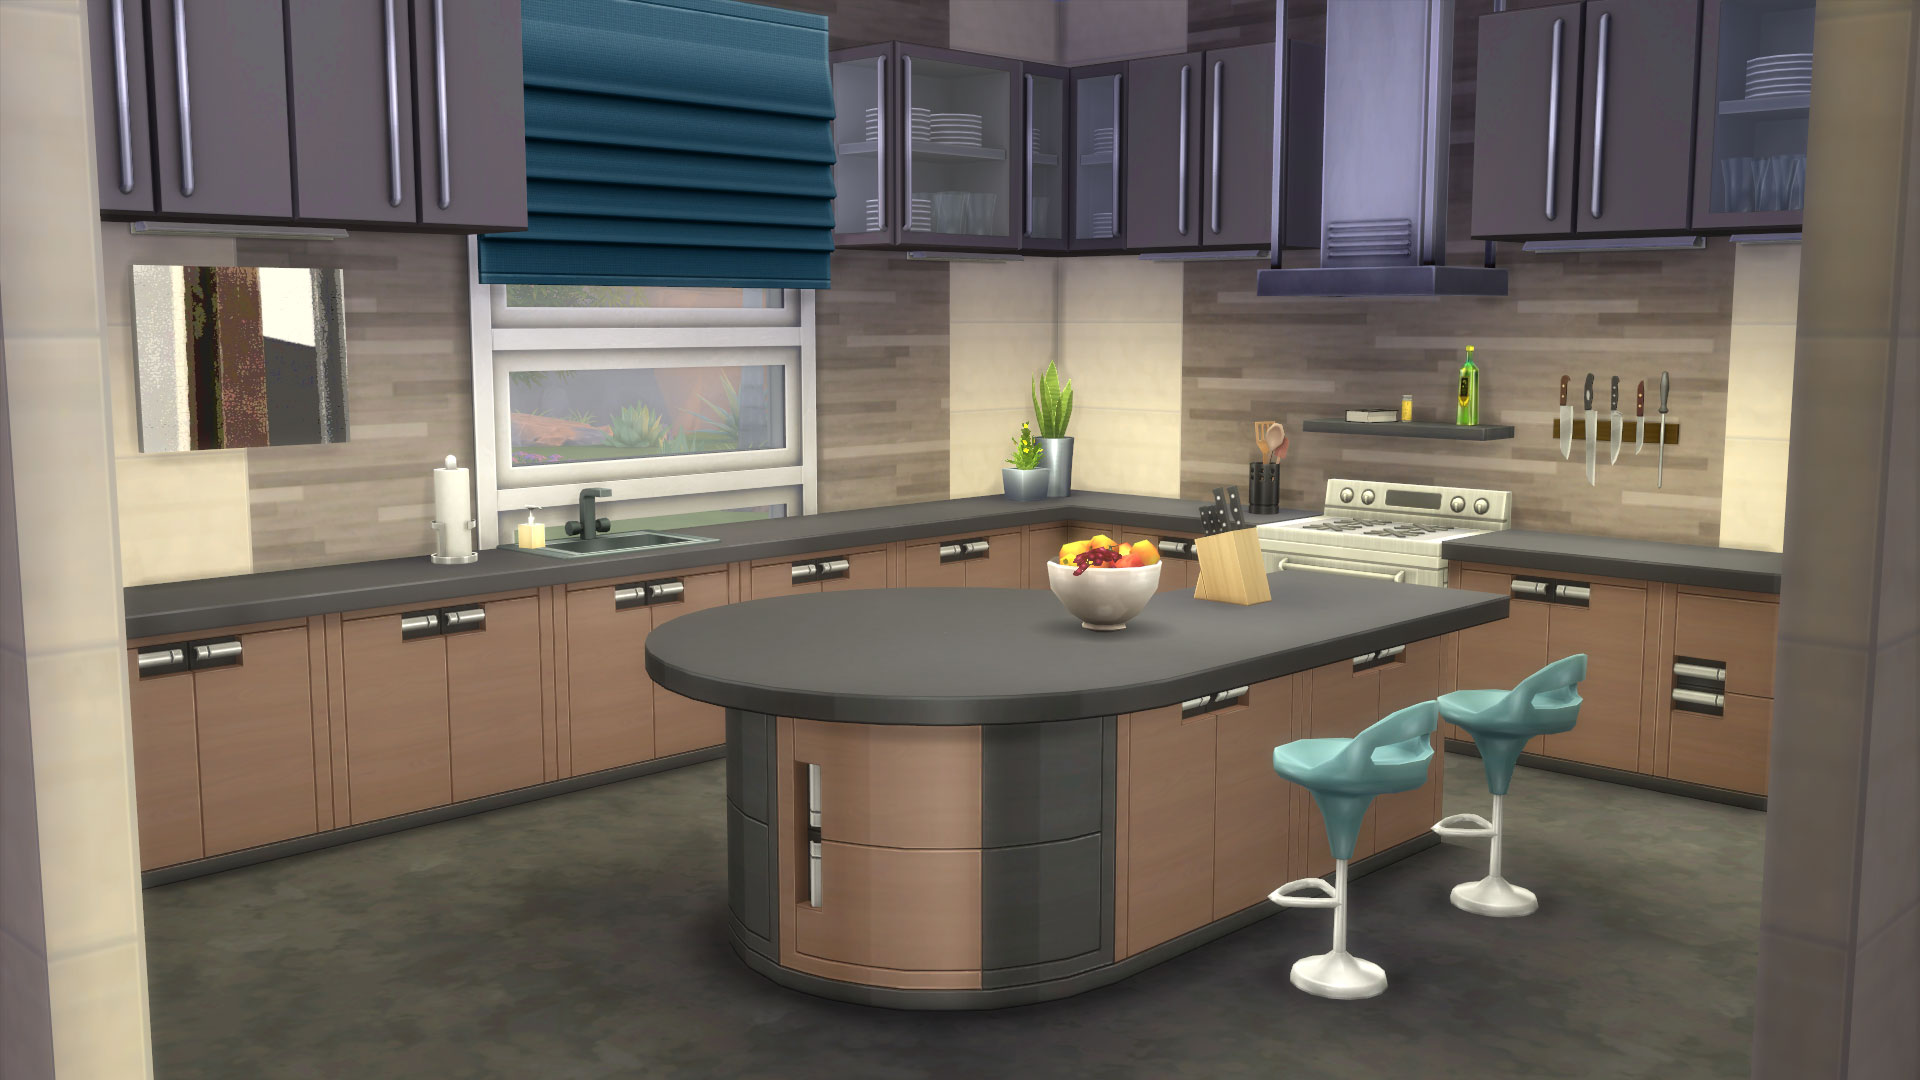 the sims 4 no dishes in sinks